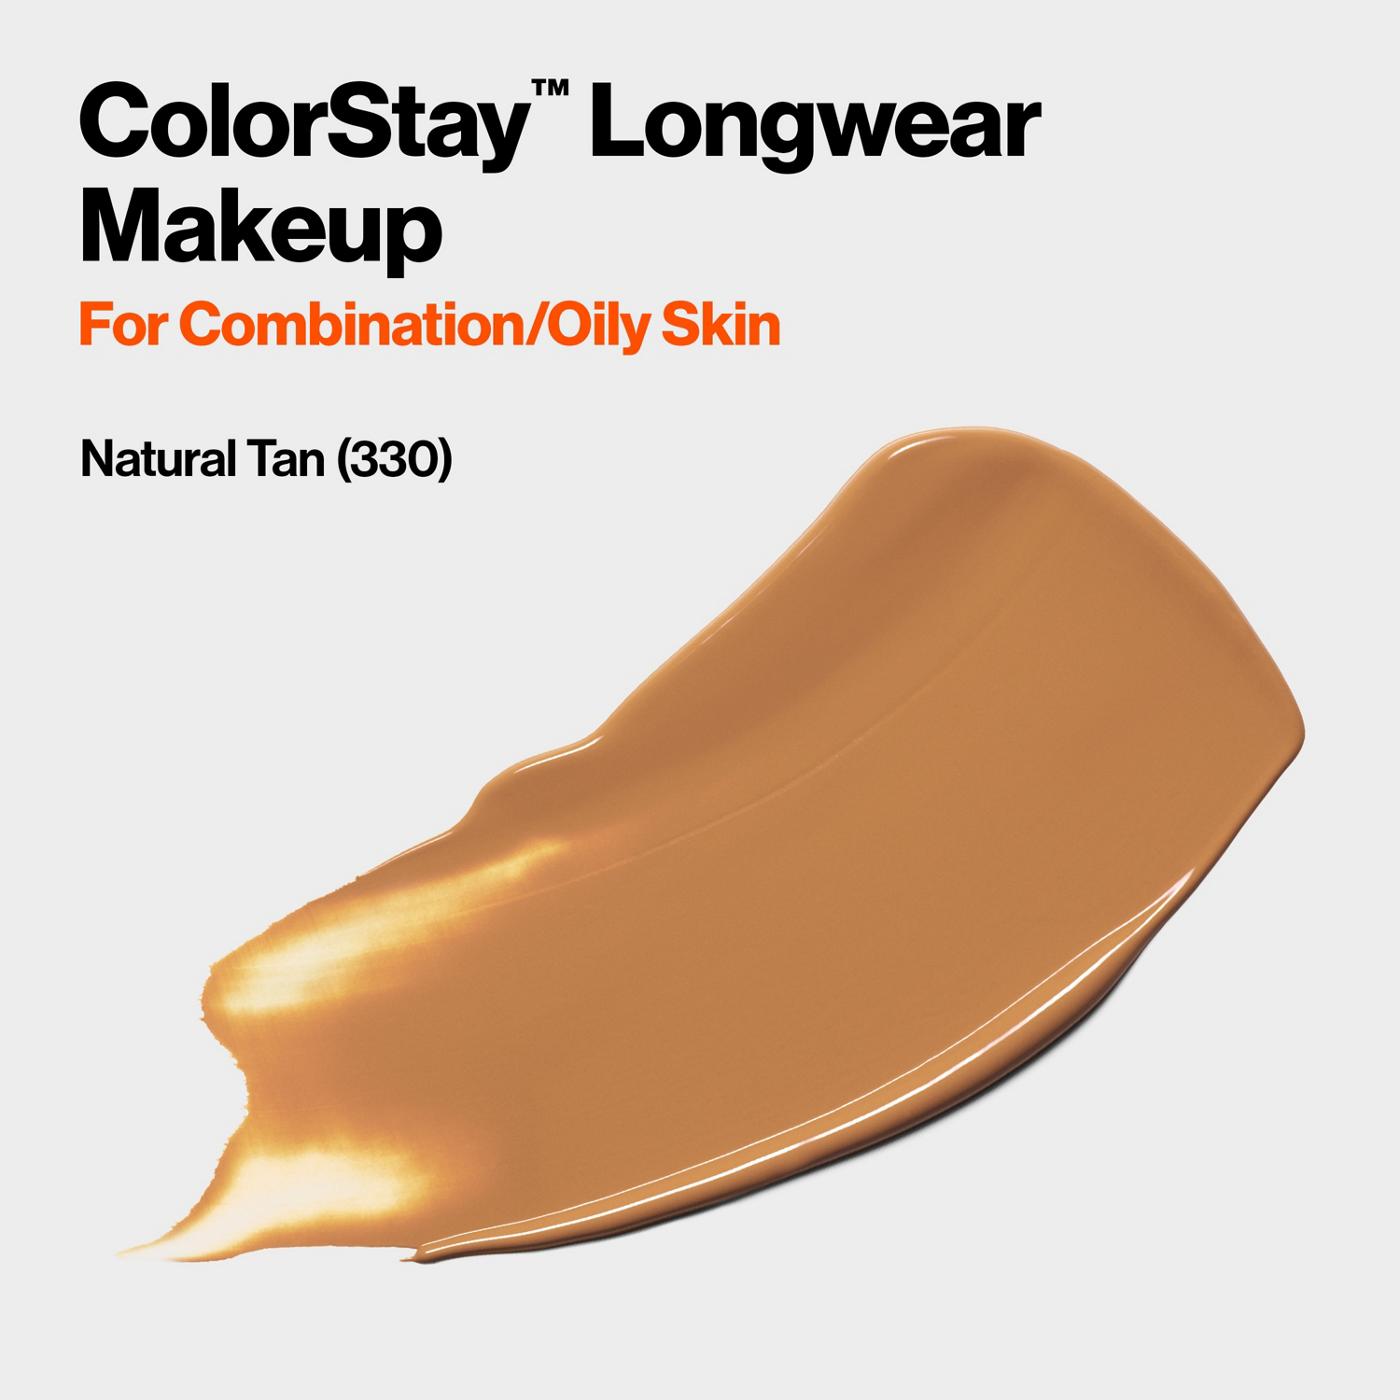 Revlon ColorStay Foundation for Combination/Oily Skin, 330 Natural Tan; image 3 of 6